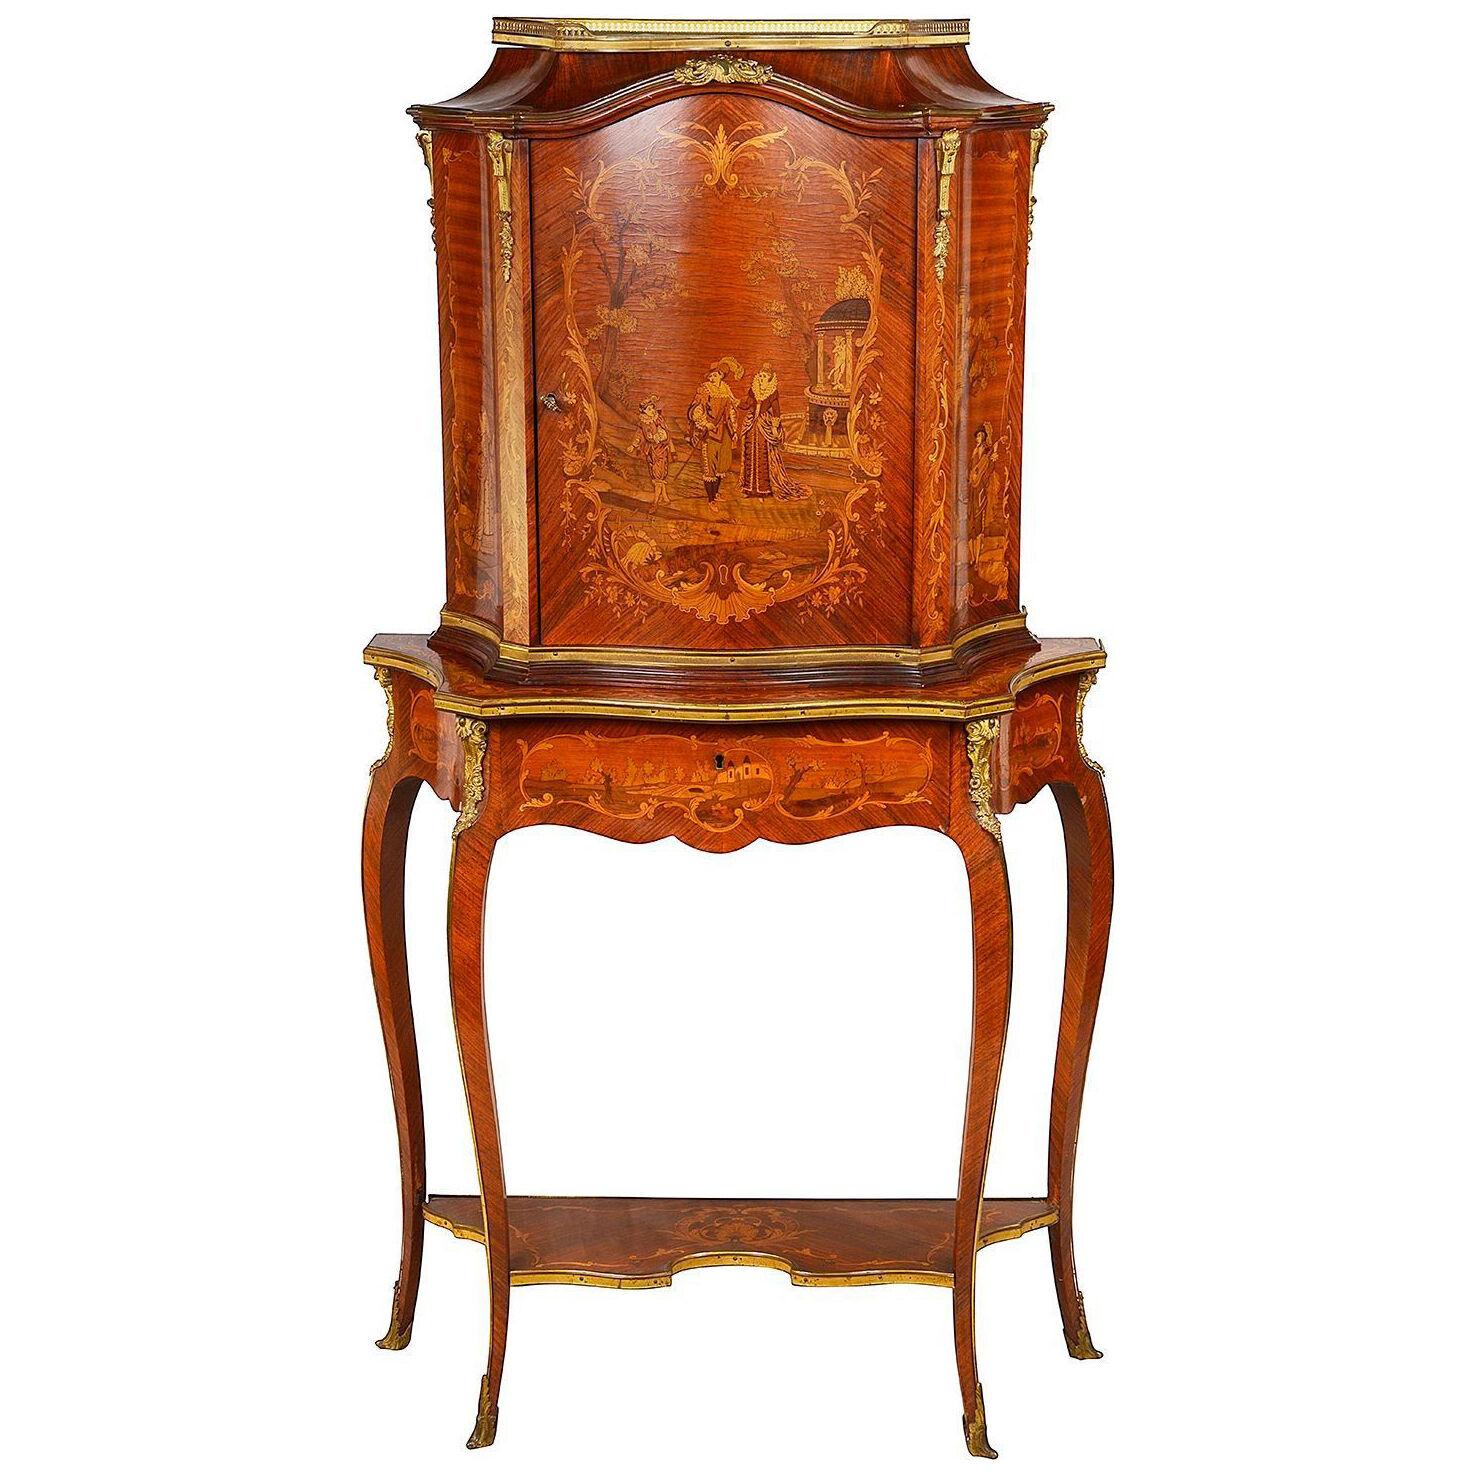 A French Louis XV style marquetry inlaid side cabinet, 19th Century